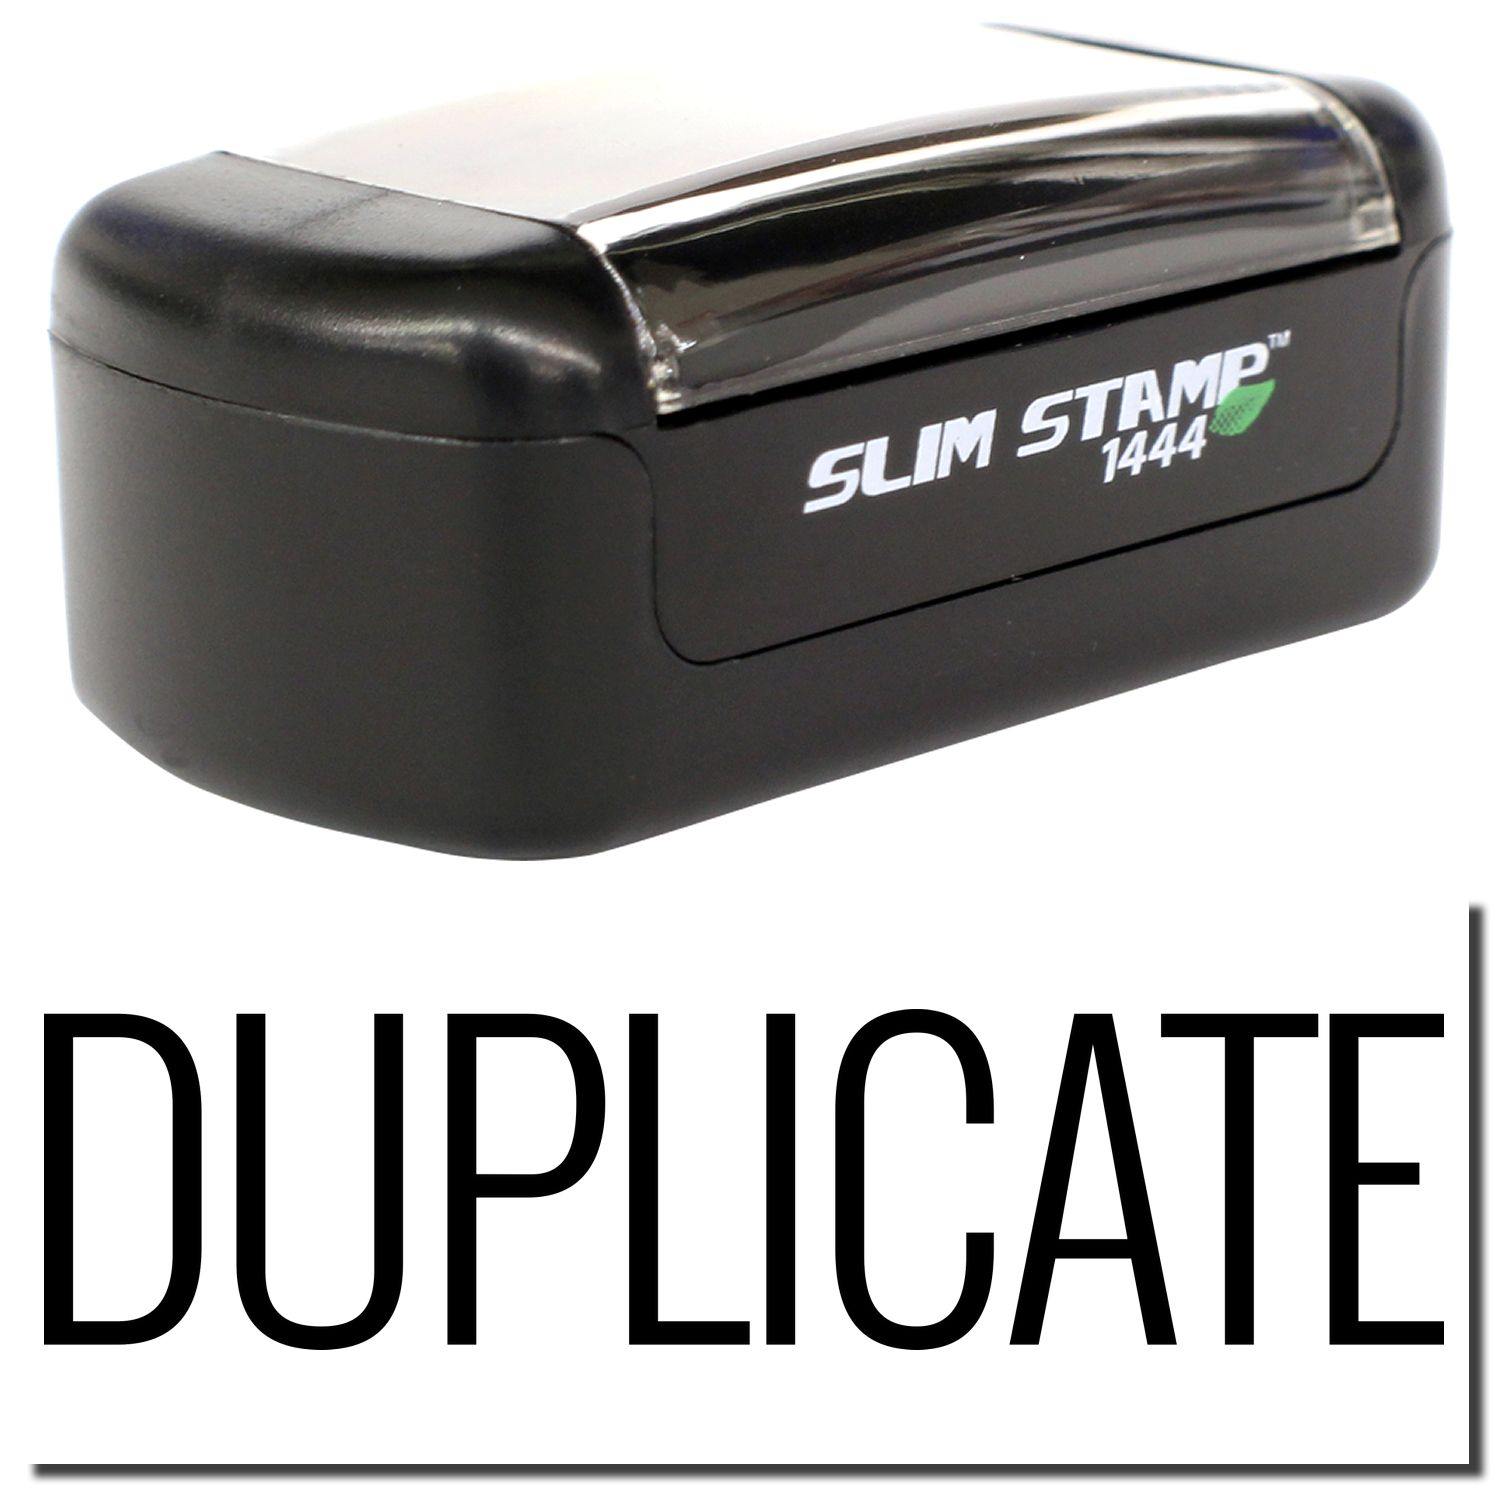 A stock office pre-inked stamp with a stamped image showing how the text "DUPLICATE" in a narrow font is displayed after stamping.